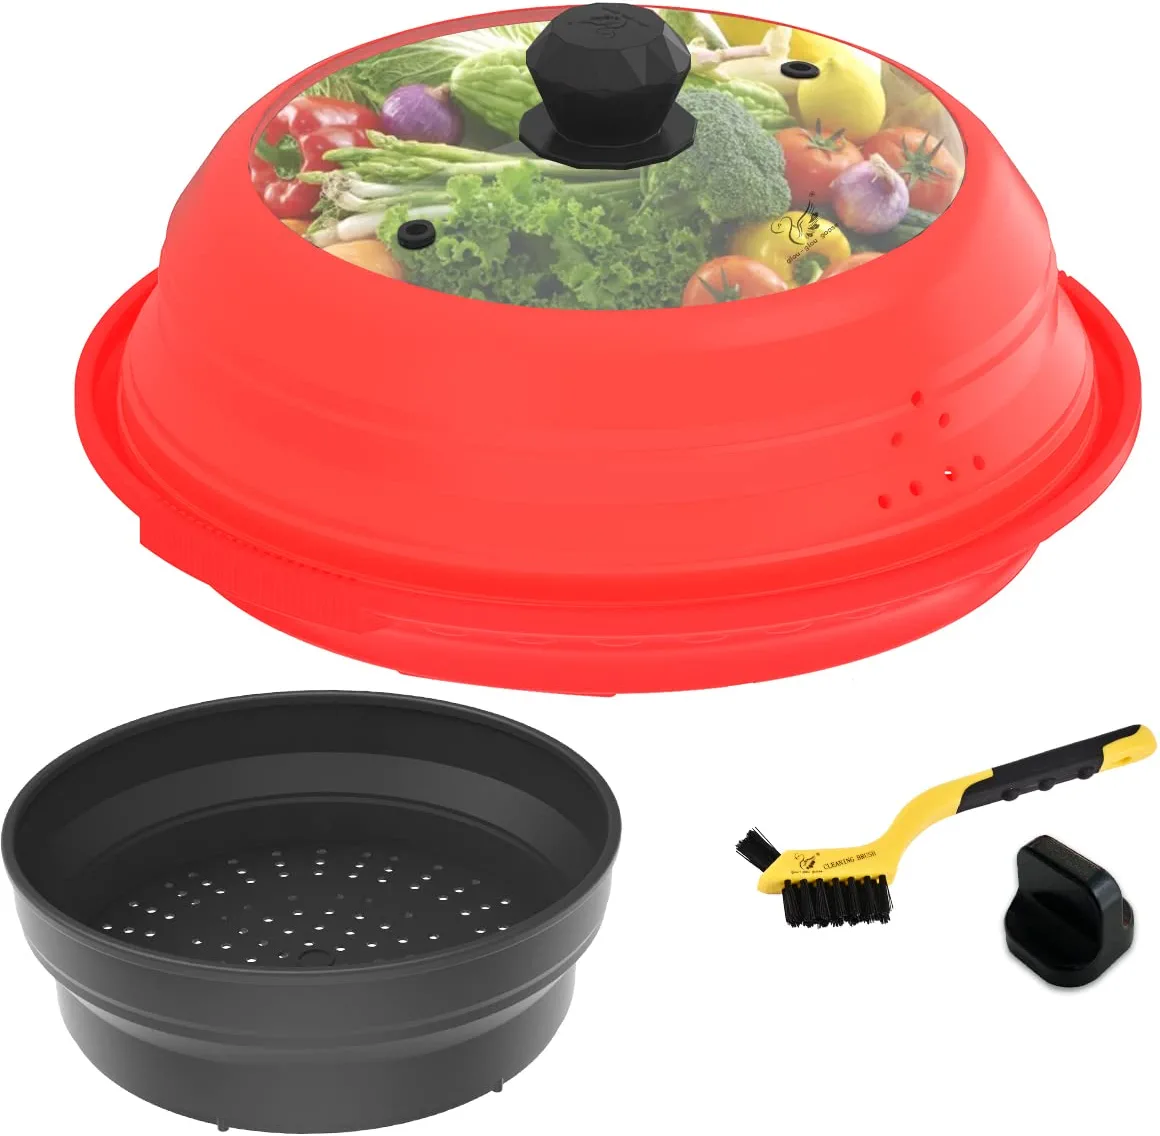 Red Cookware set